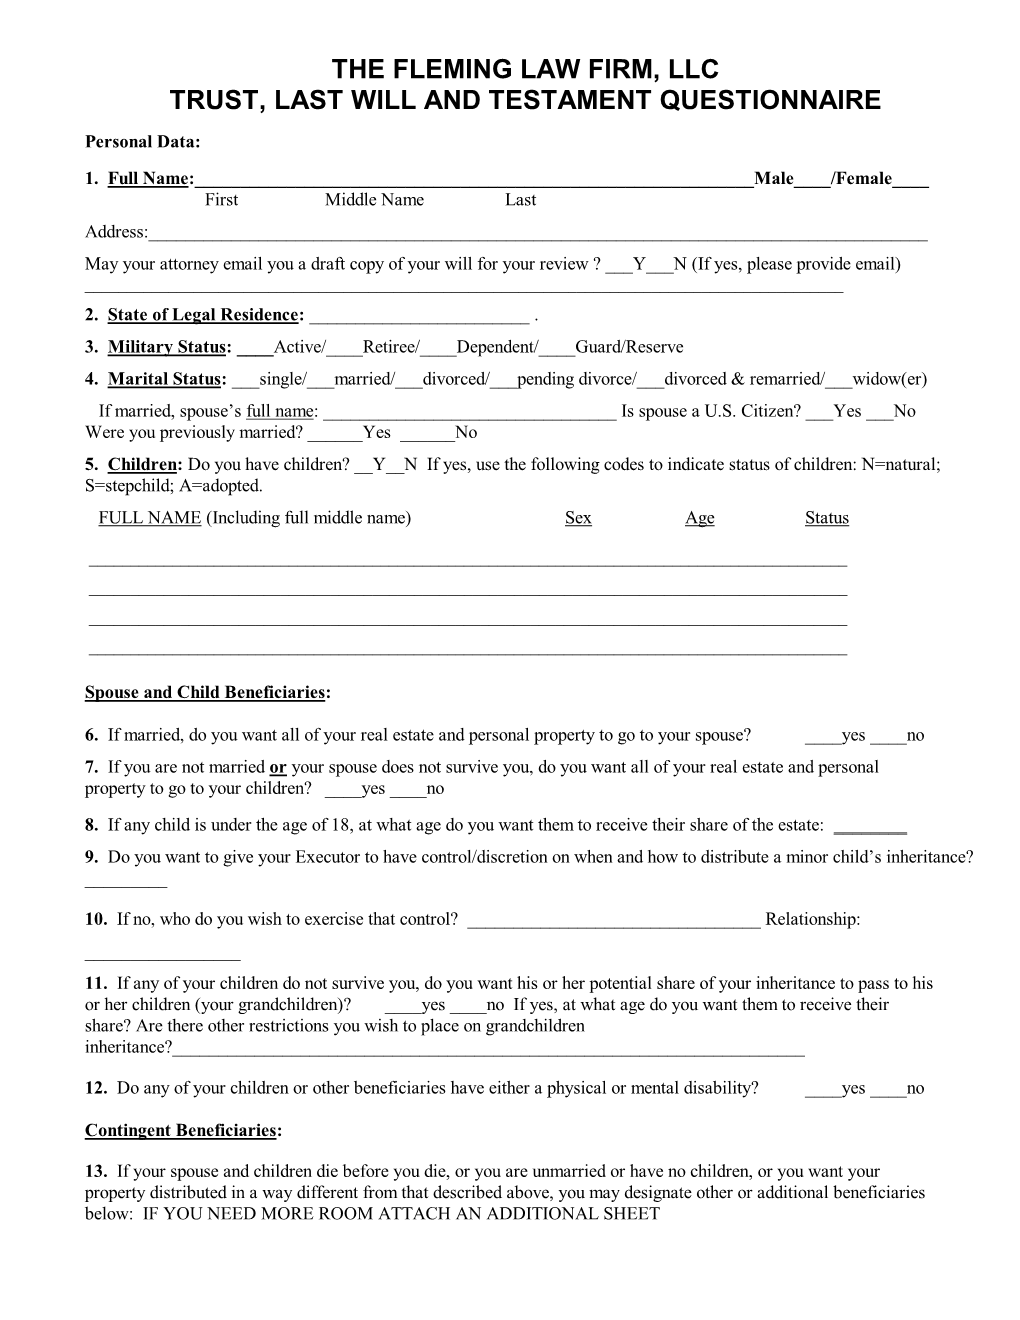 Last Will and Testament Questionnaire